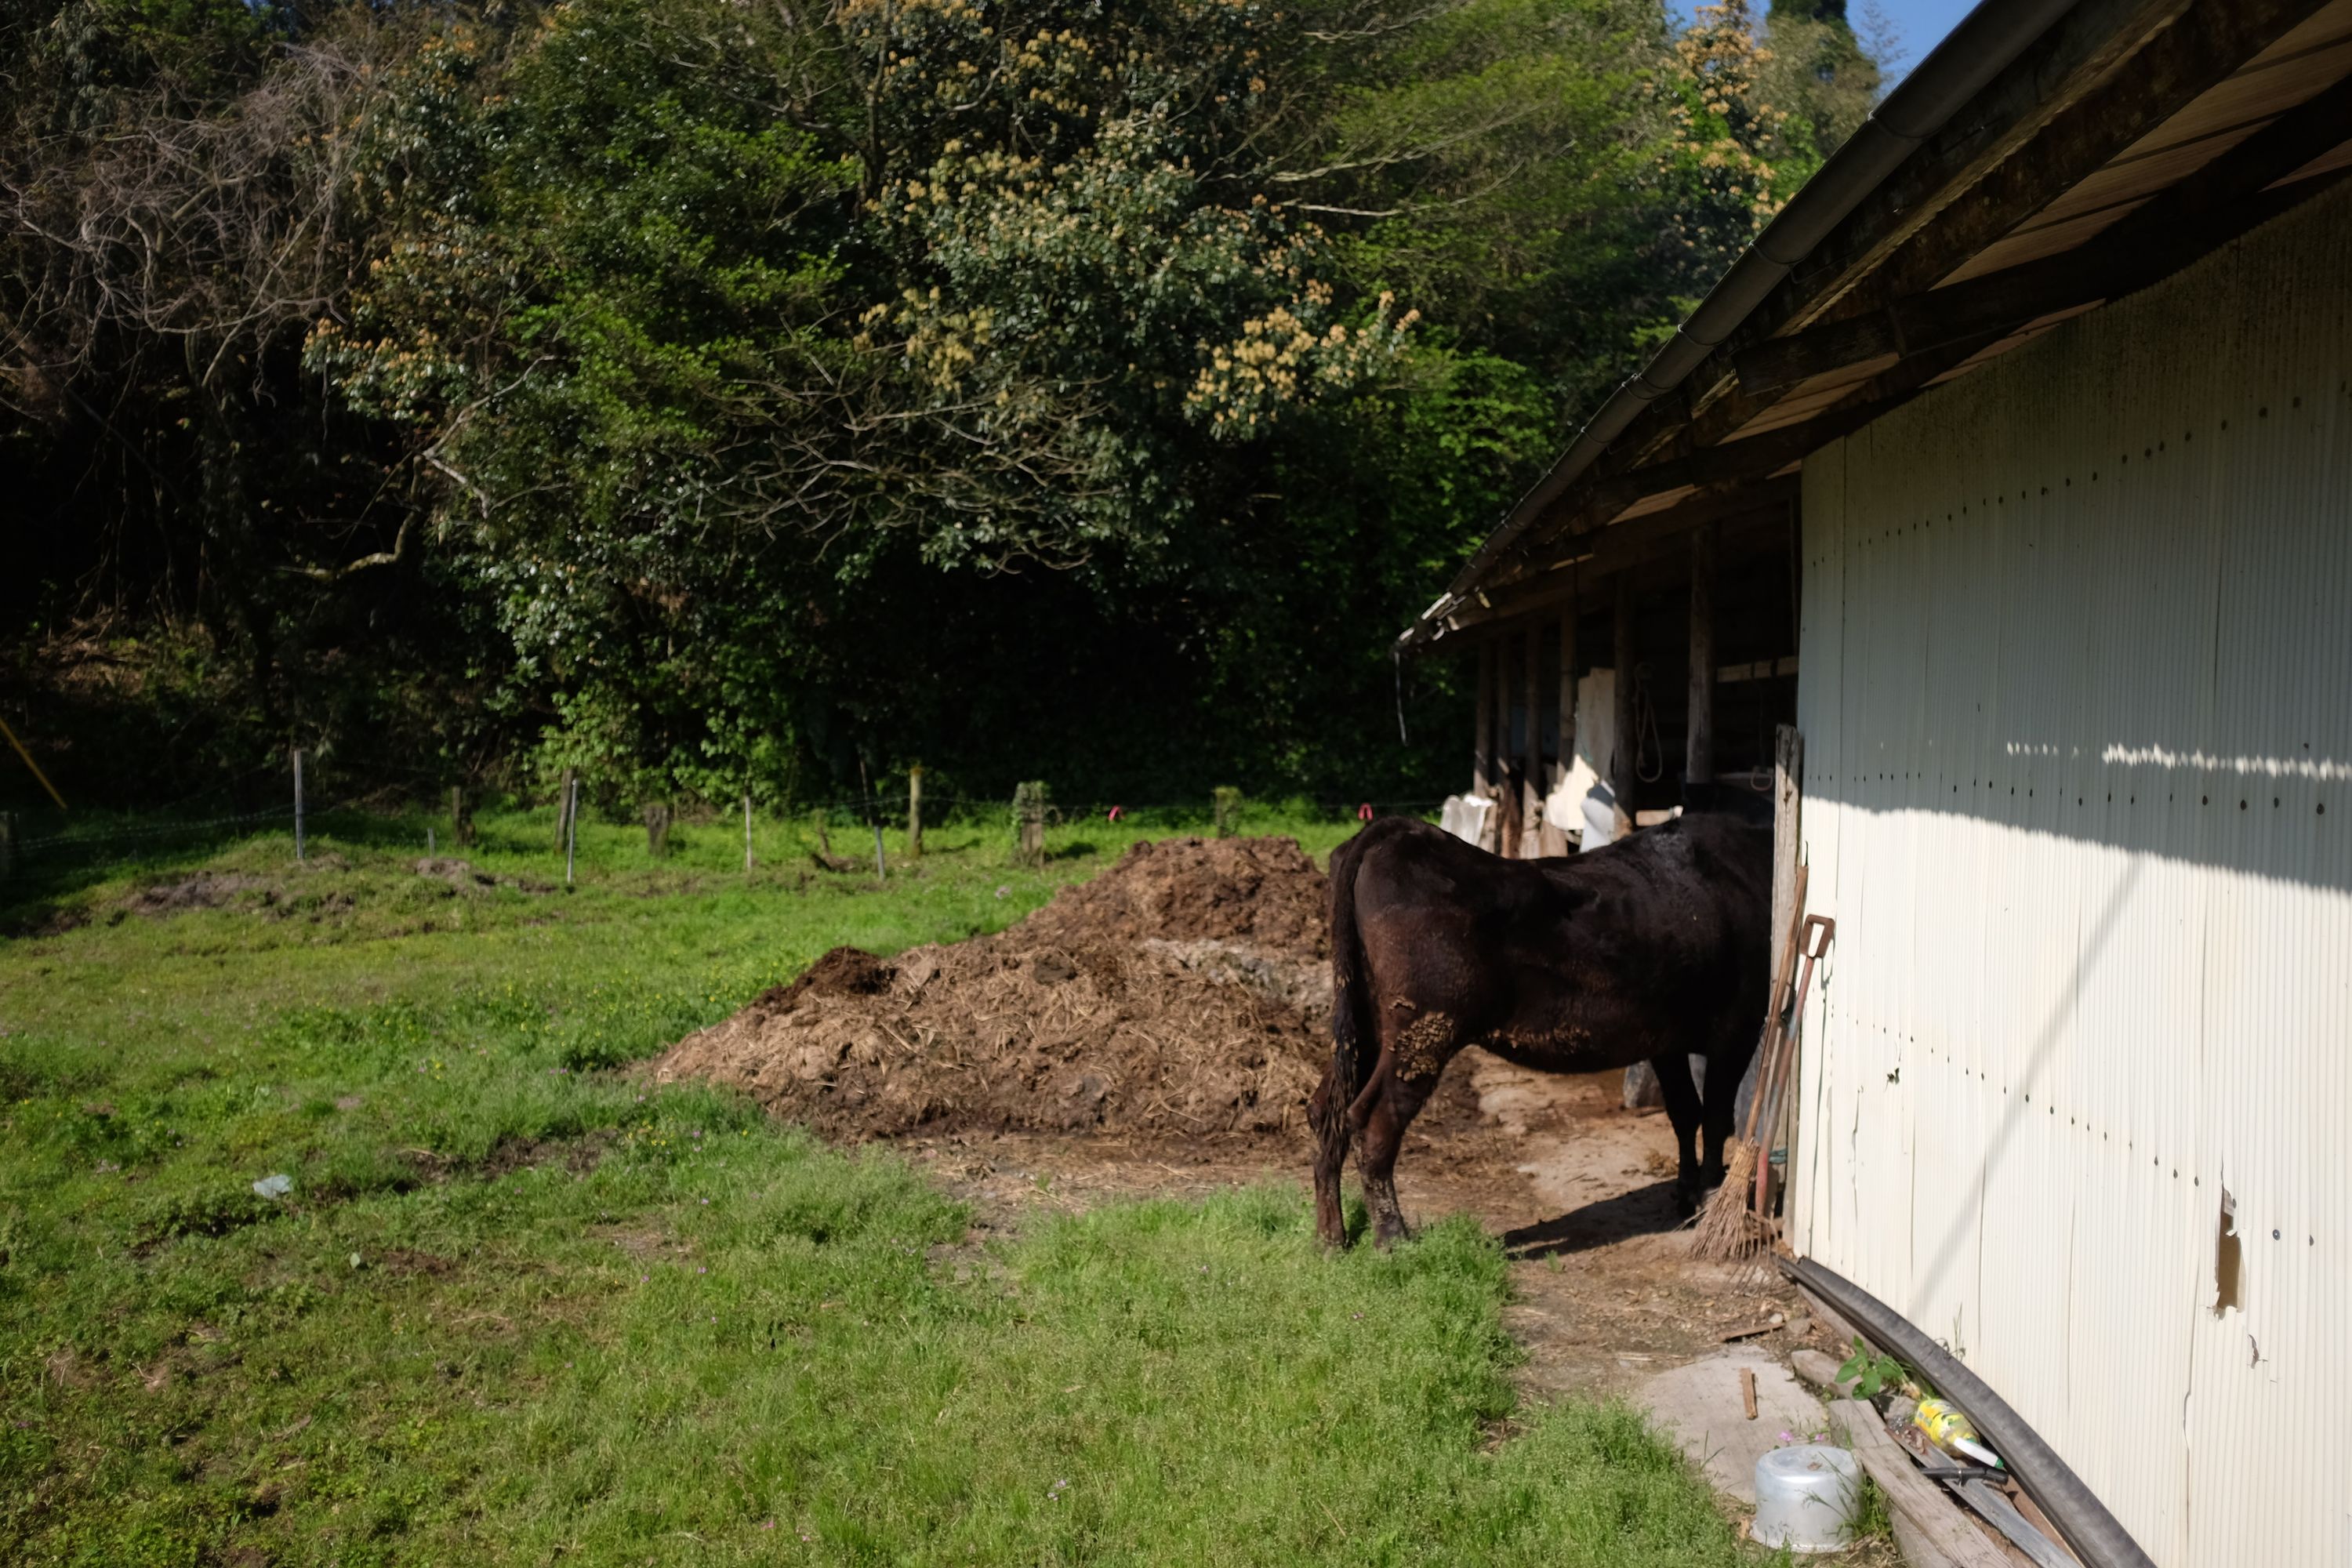 A horse with its head disappearing into a white barn.